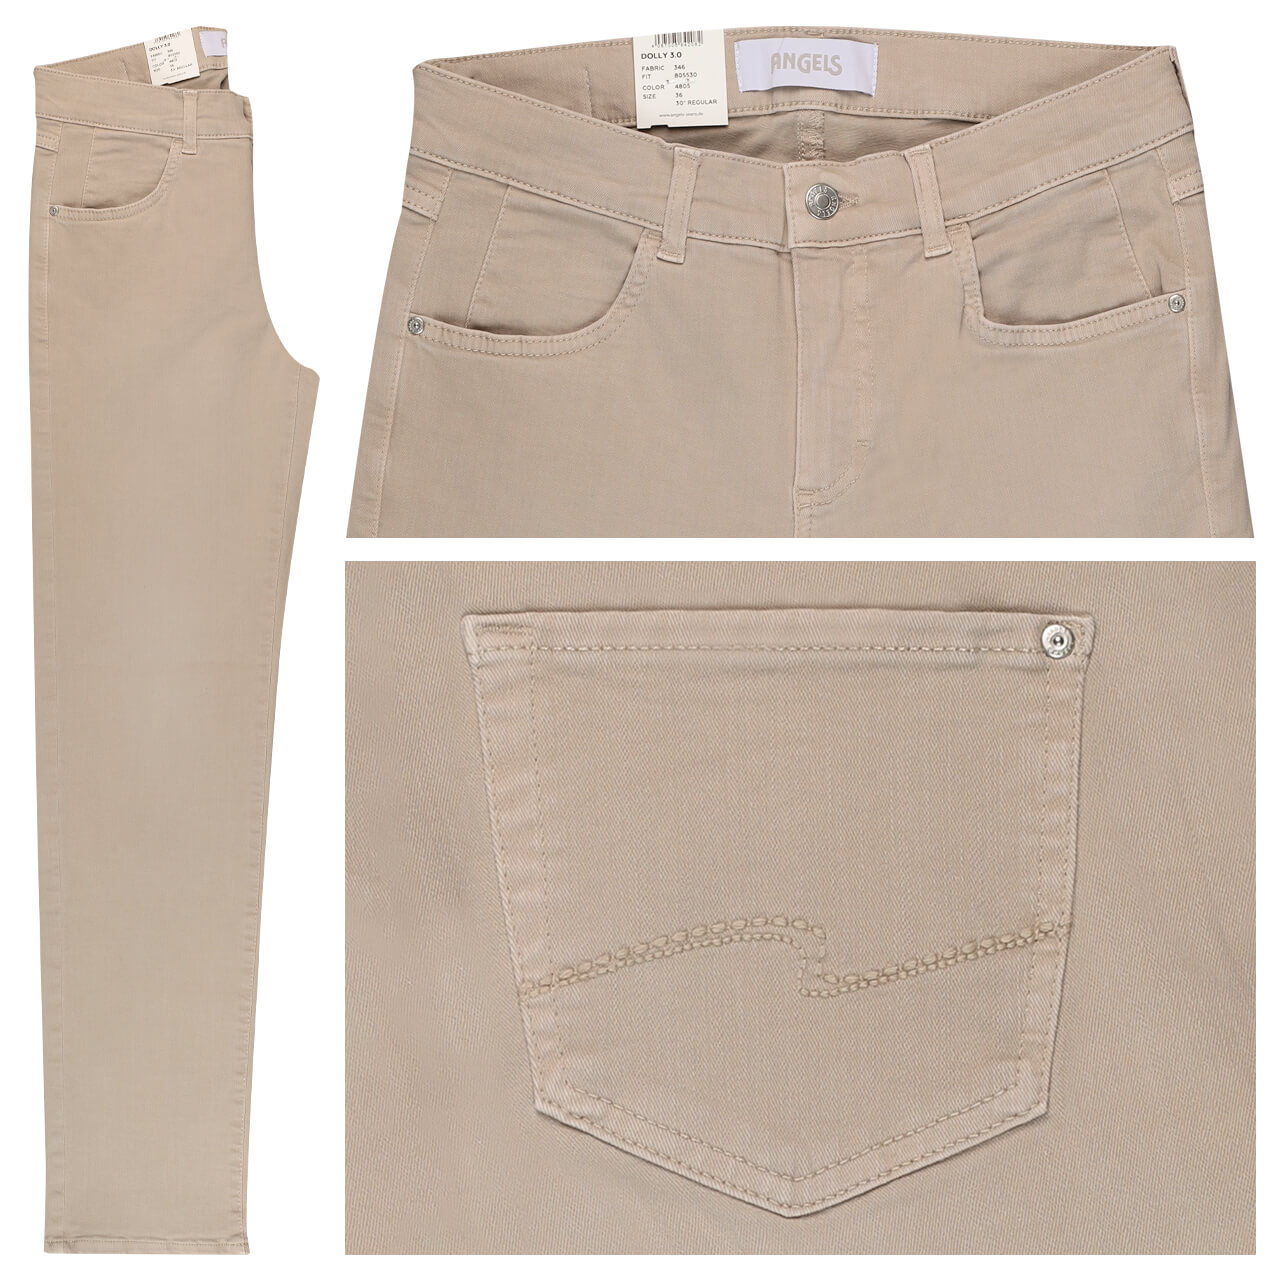 Angels Dolly Jeans beige used